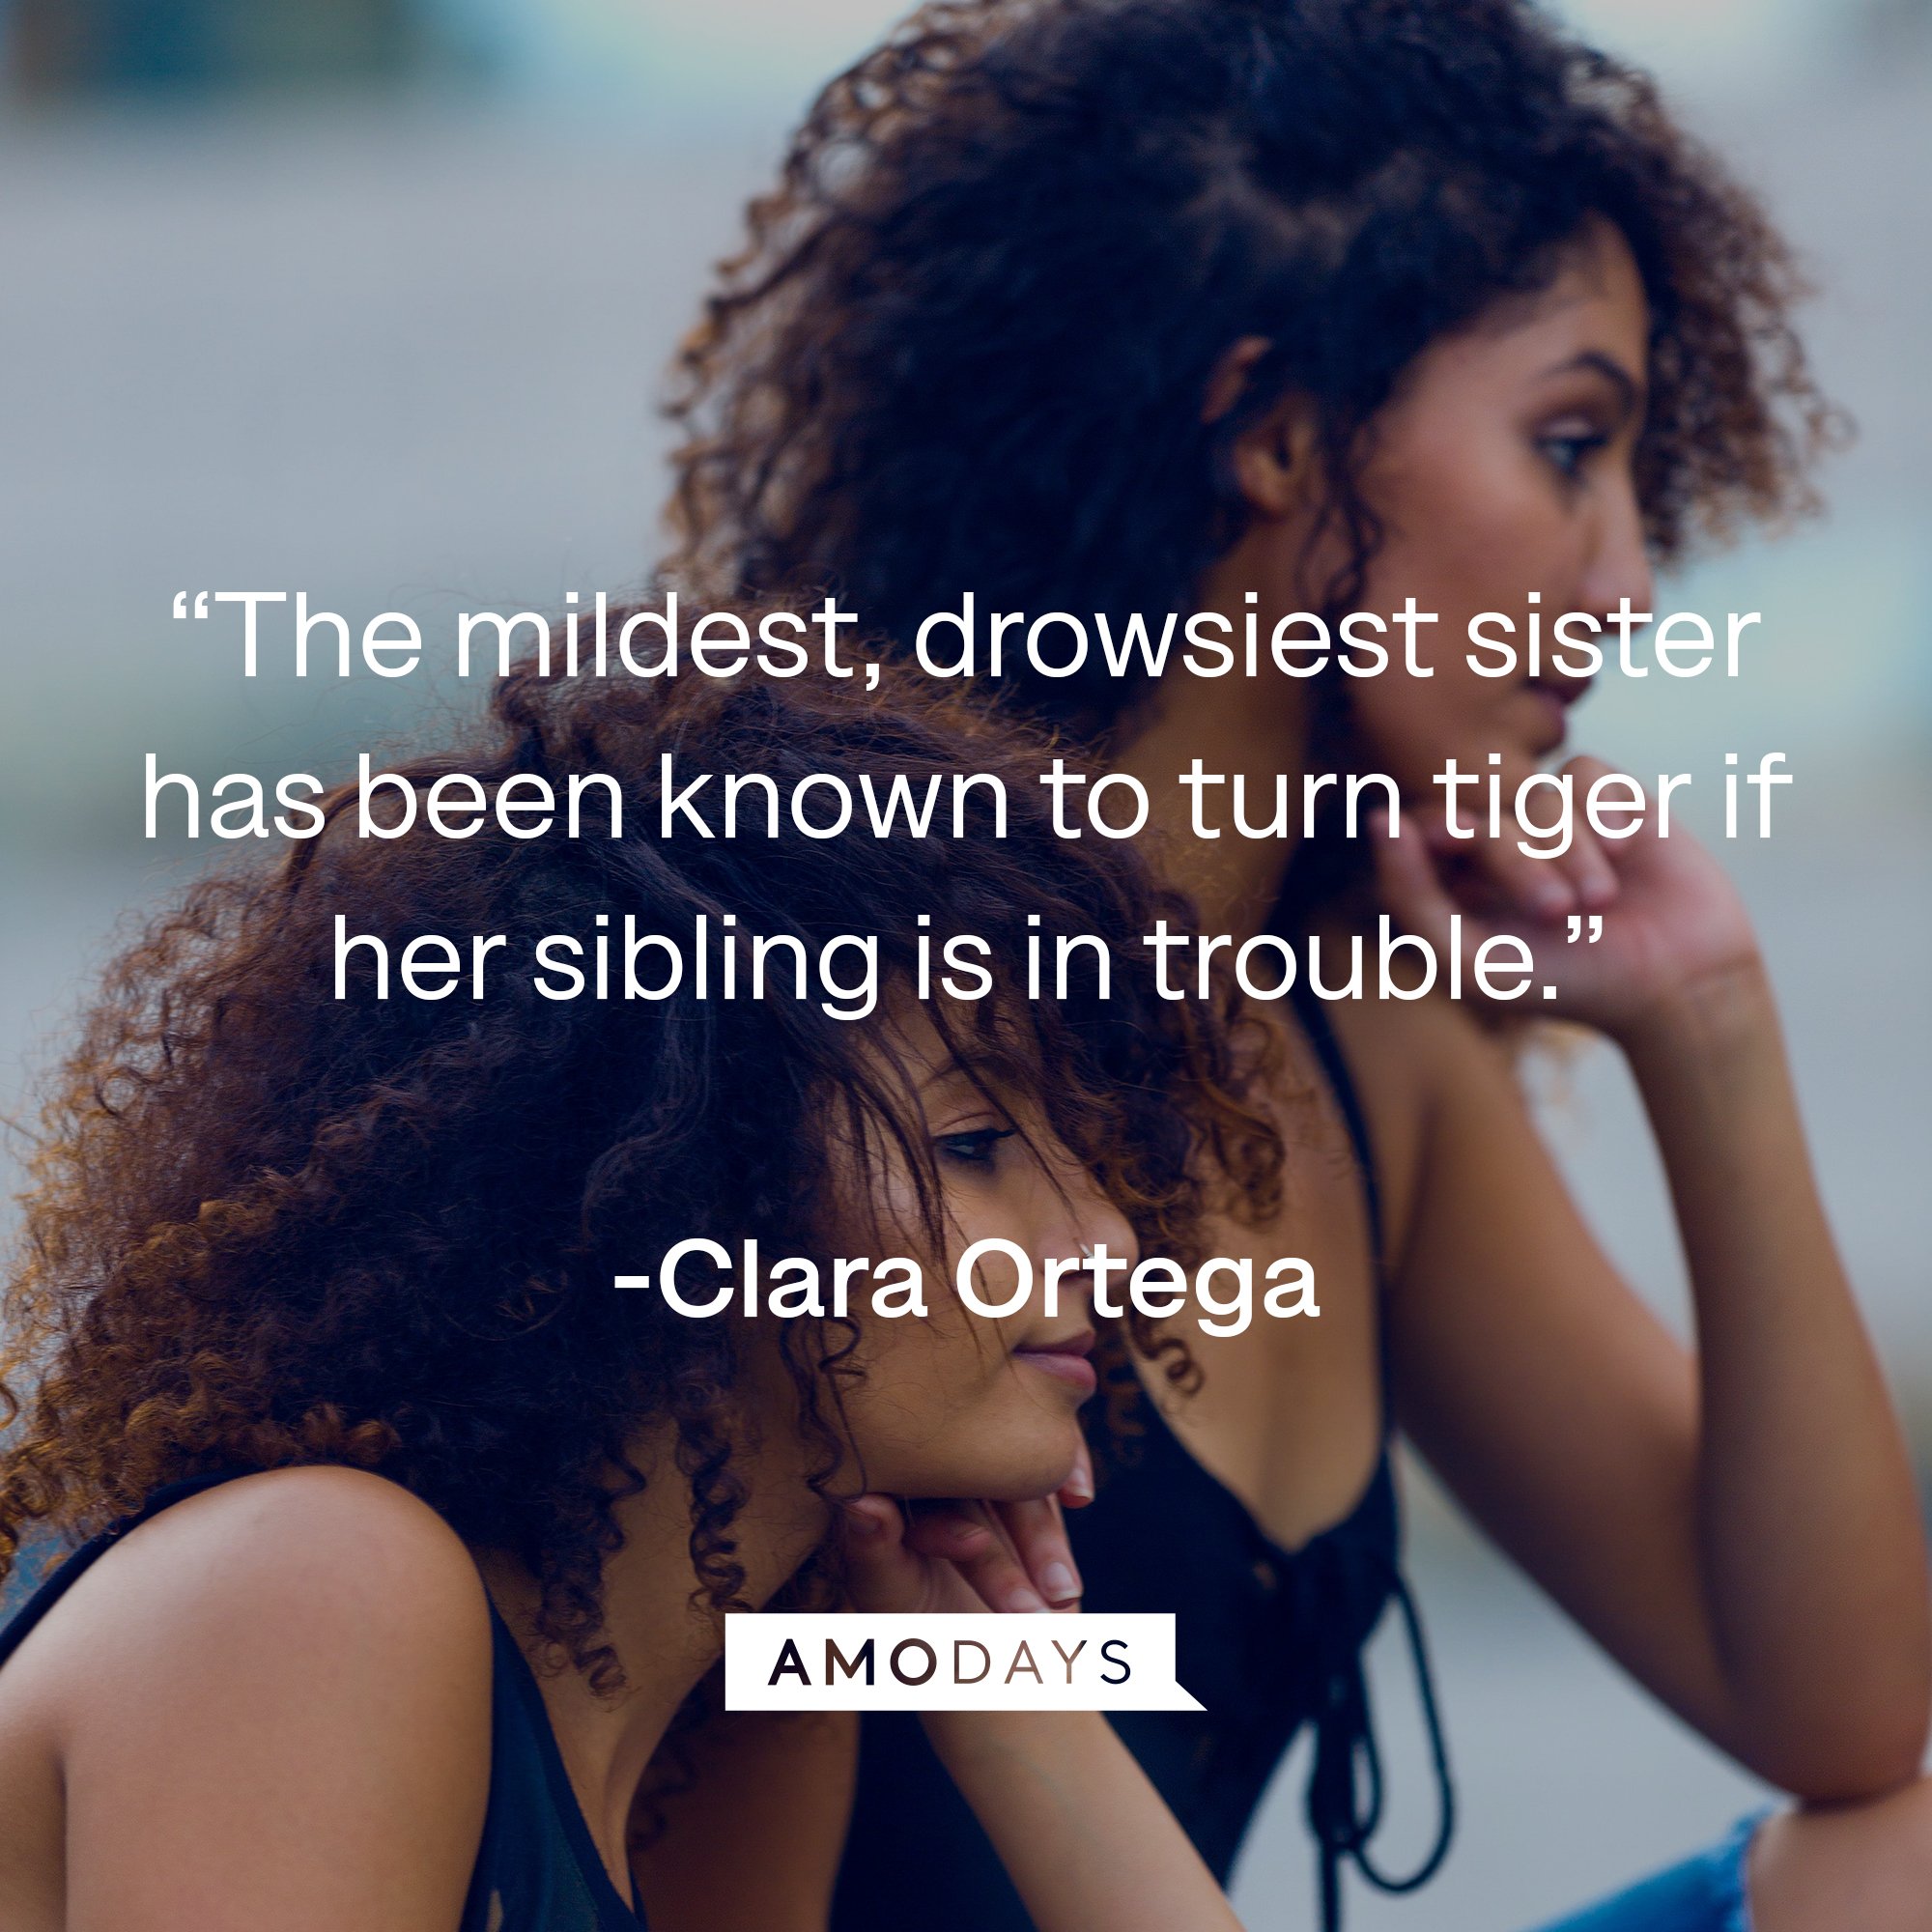  Clara Ortega's quote: “The mildest, drowsiest sister has been known to turn tiger if her sibling is in trouble.” | Image: AmoDays